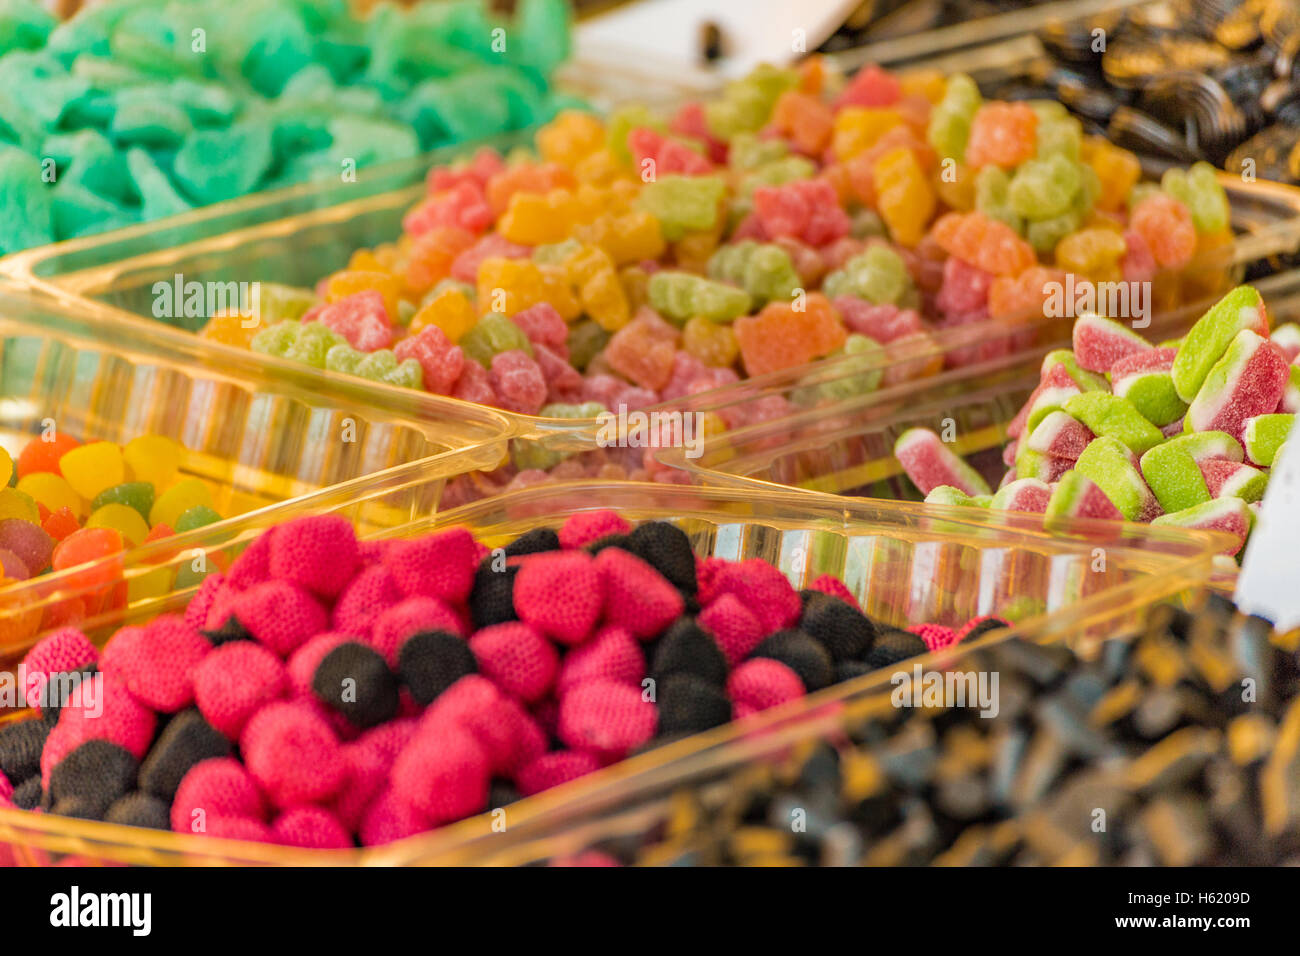 Background of colourful candy jellies in stall market Stock Photo